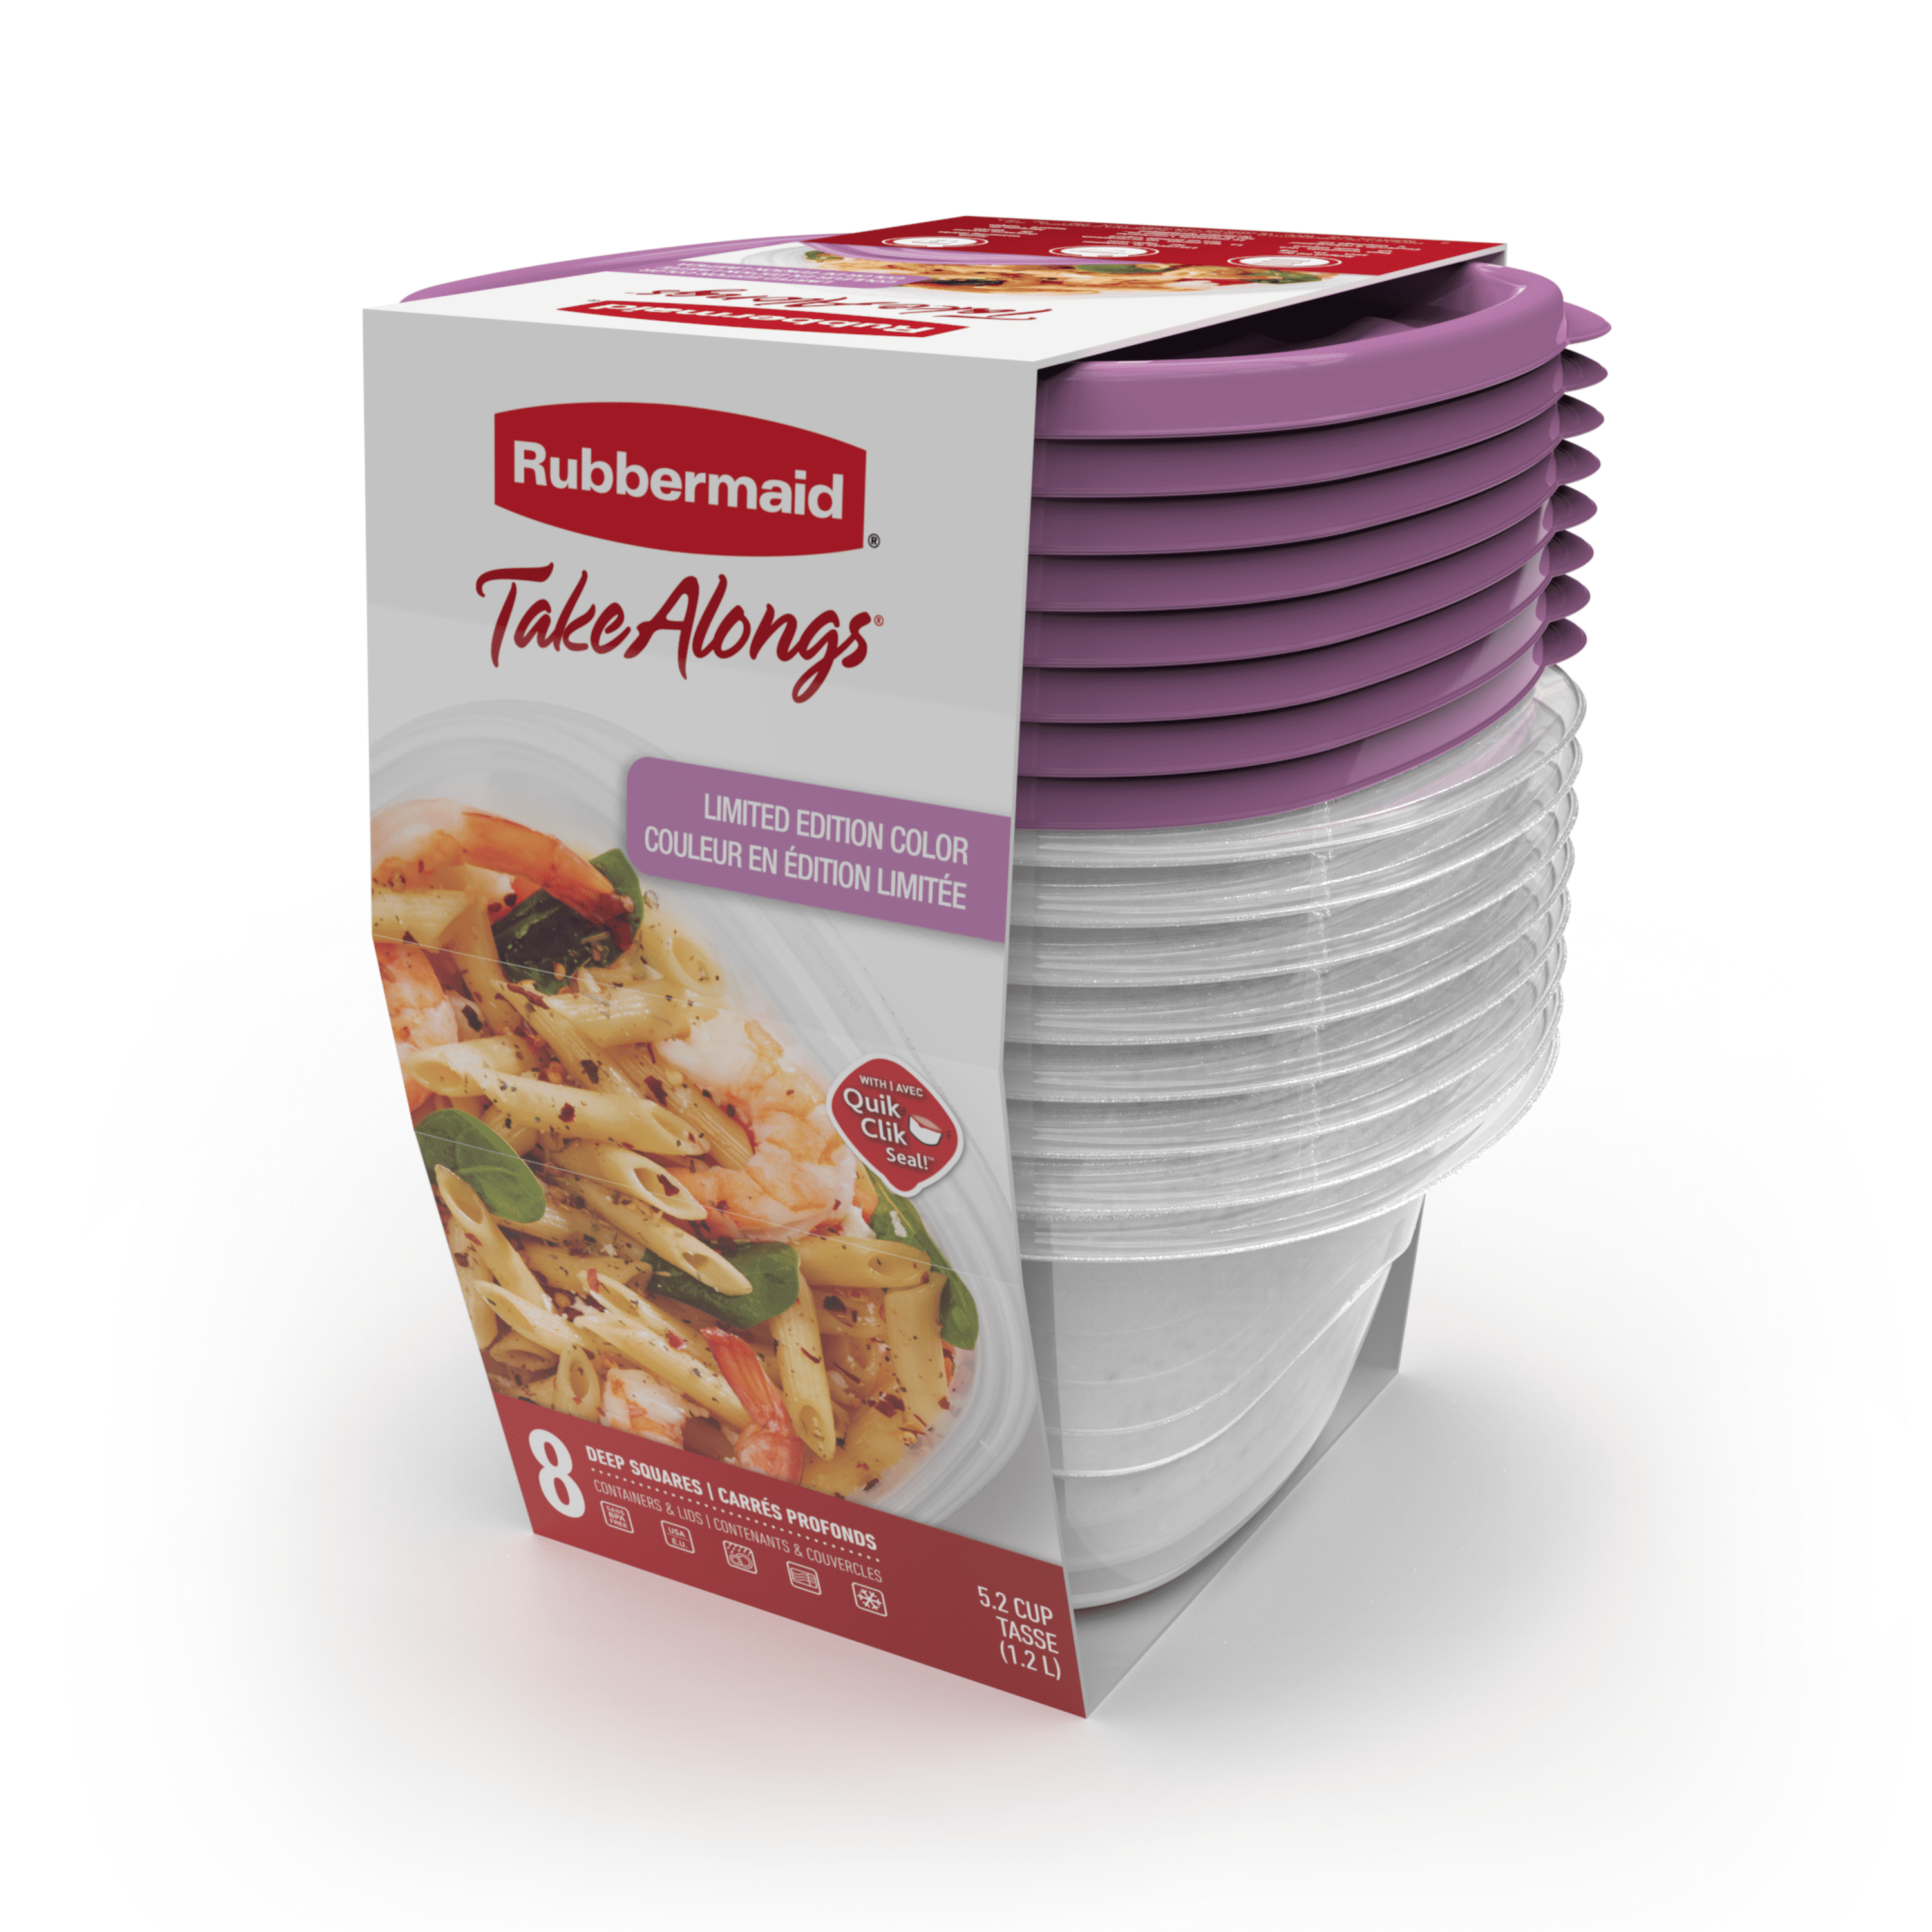 Rubbermaid Take Alongs 2 Pack Gold Holiday Wedding Cookie Storage Container  NEW